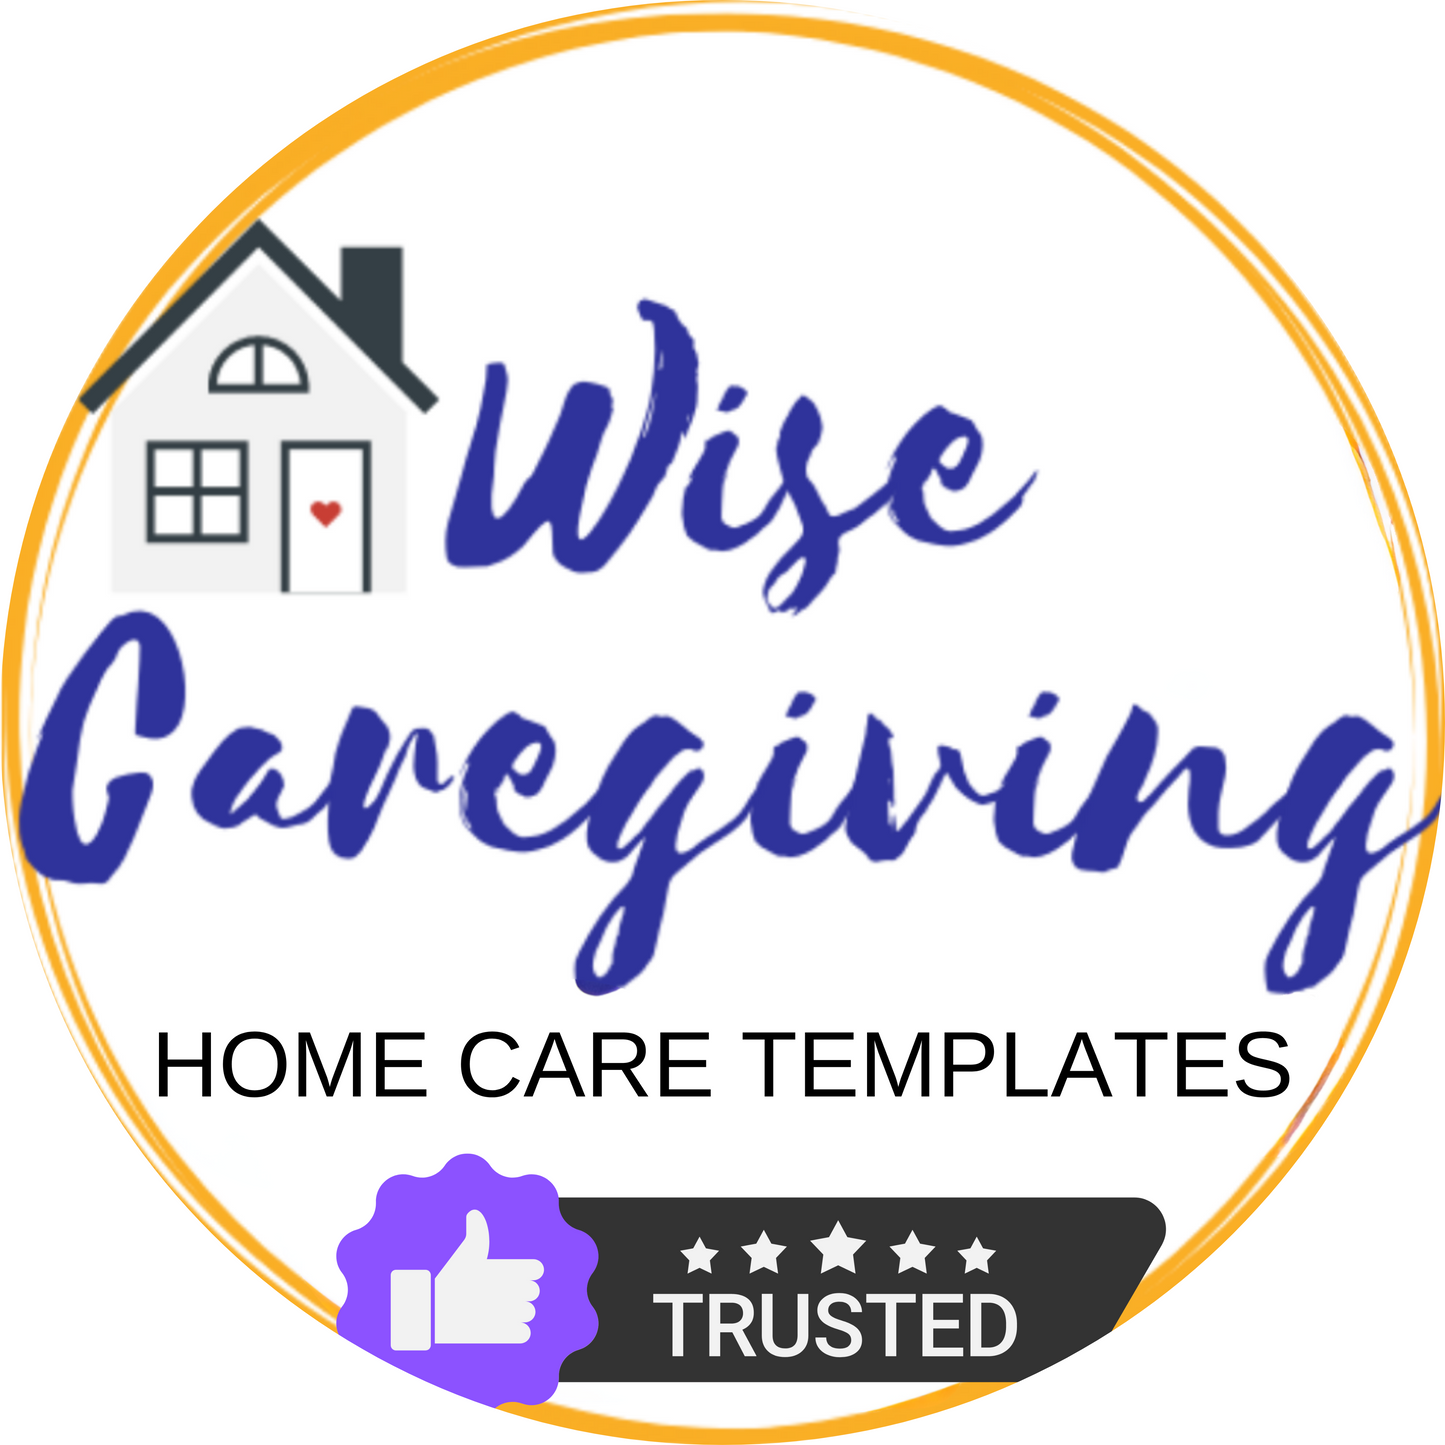 Home Care Assessment Fillable Form Template (NON-MEDICAL)